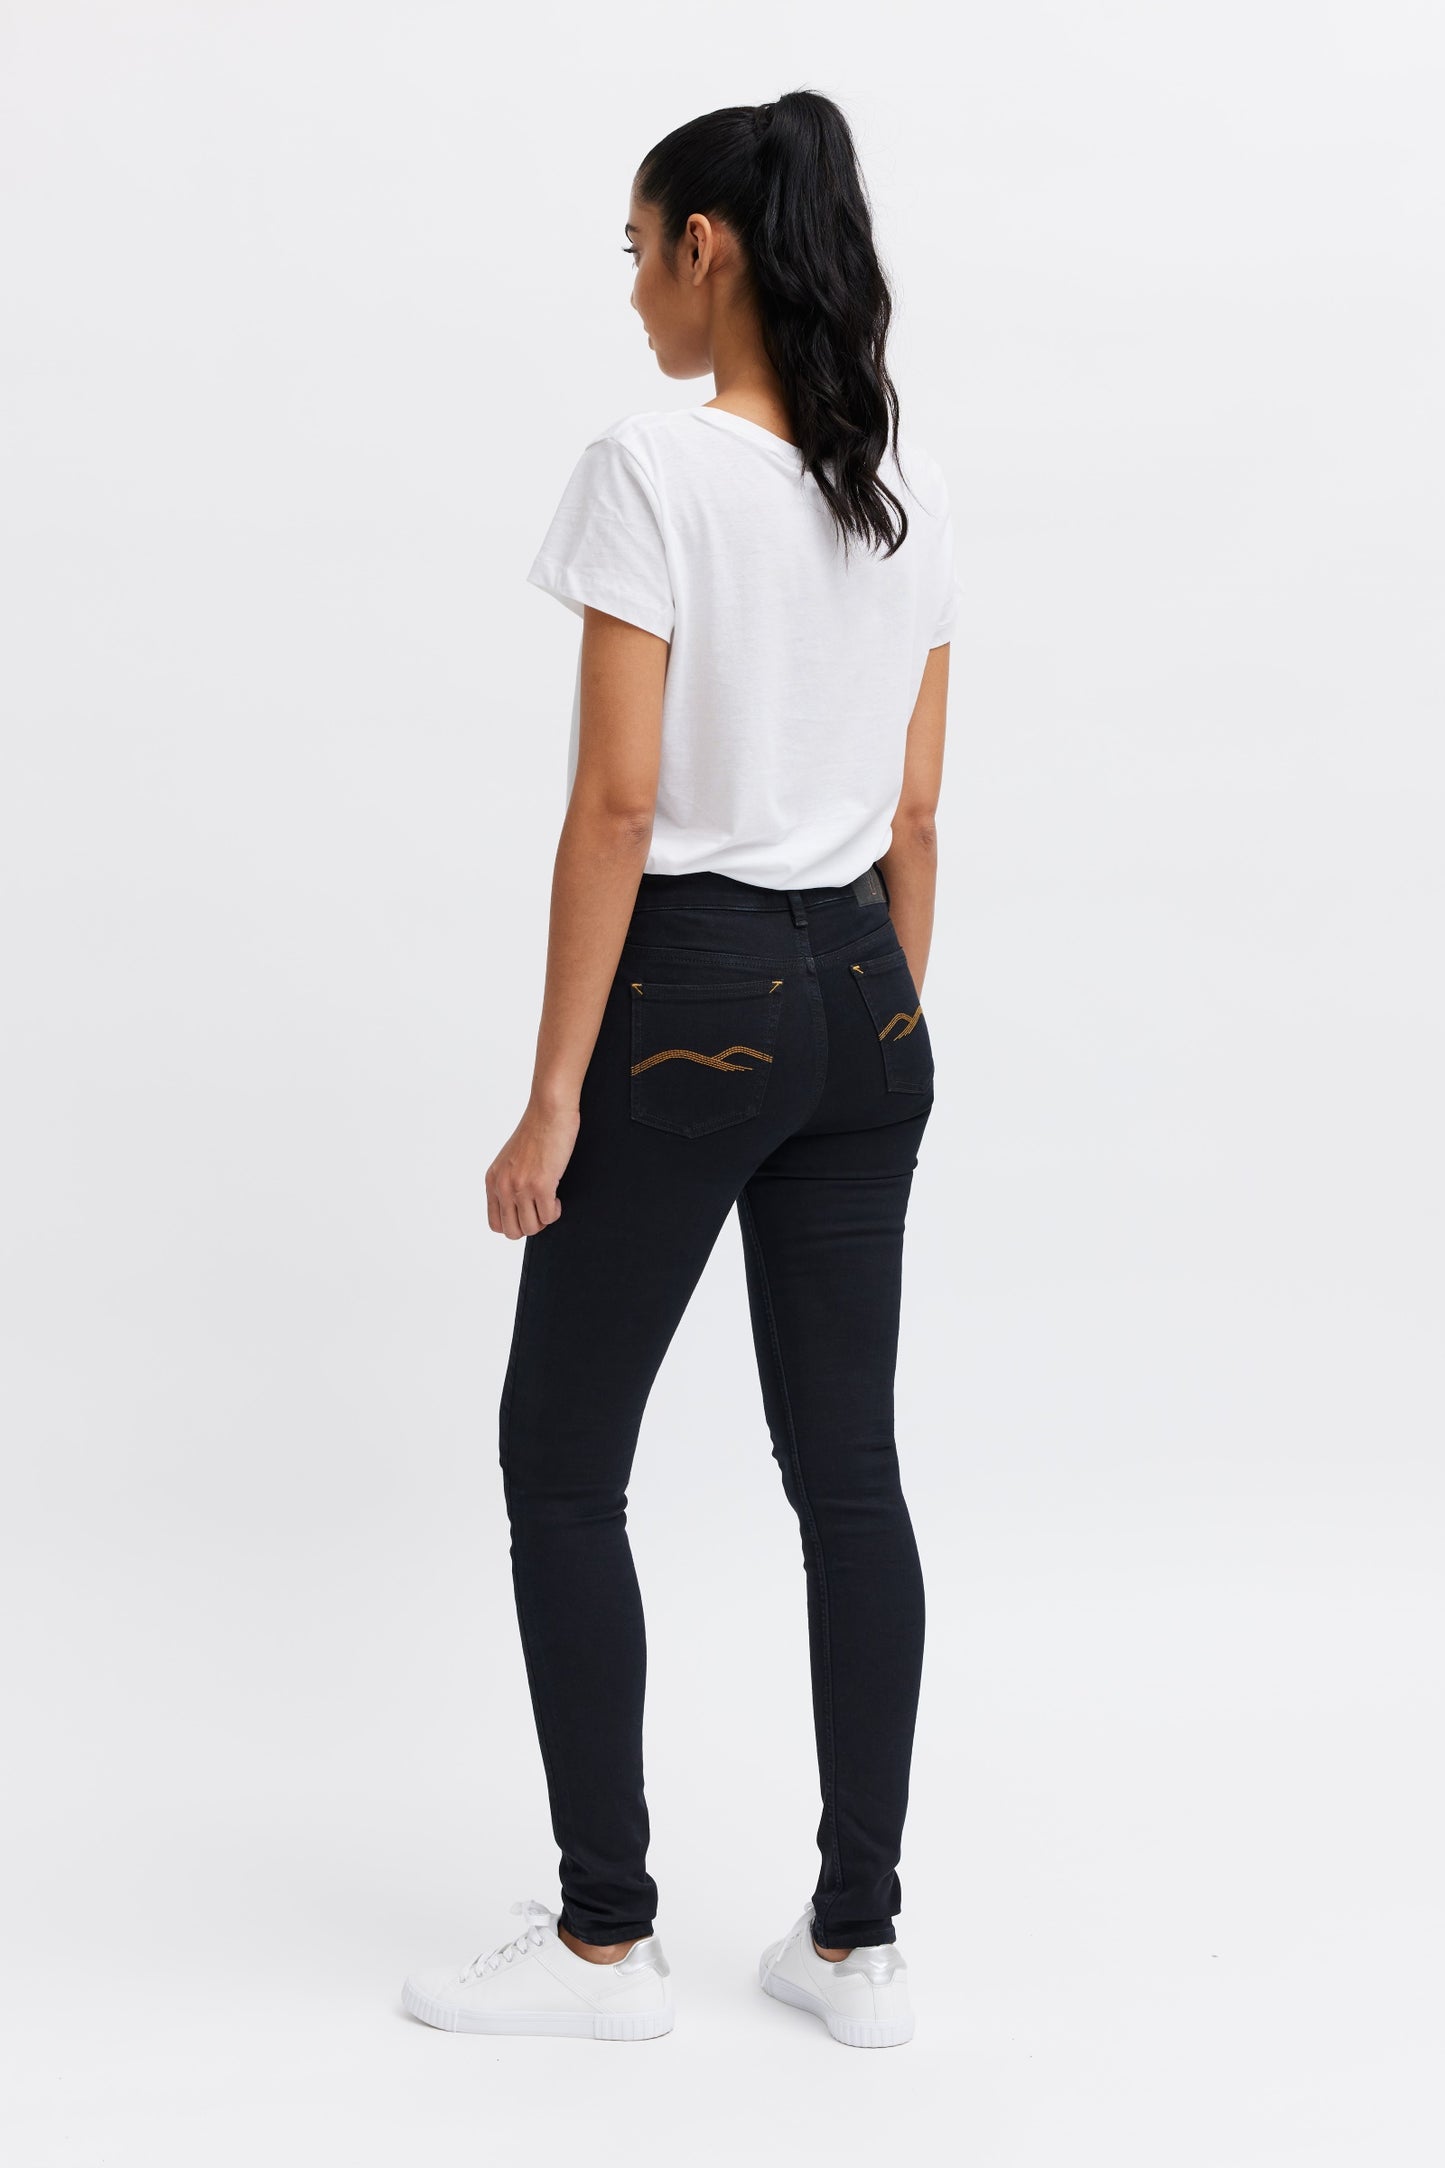 Slim fit organic black jeans for women - ethical fashion